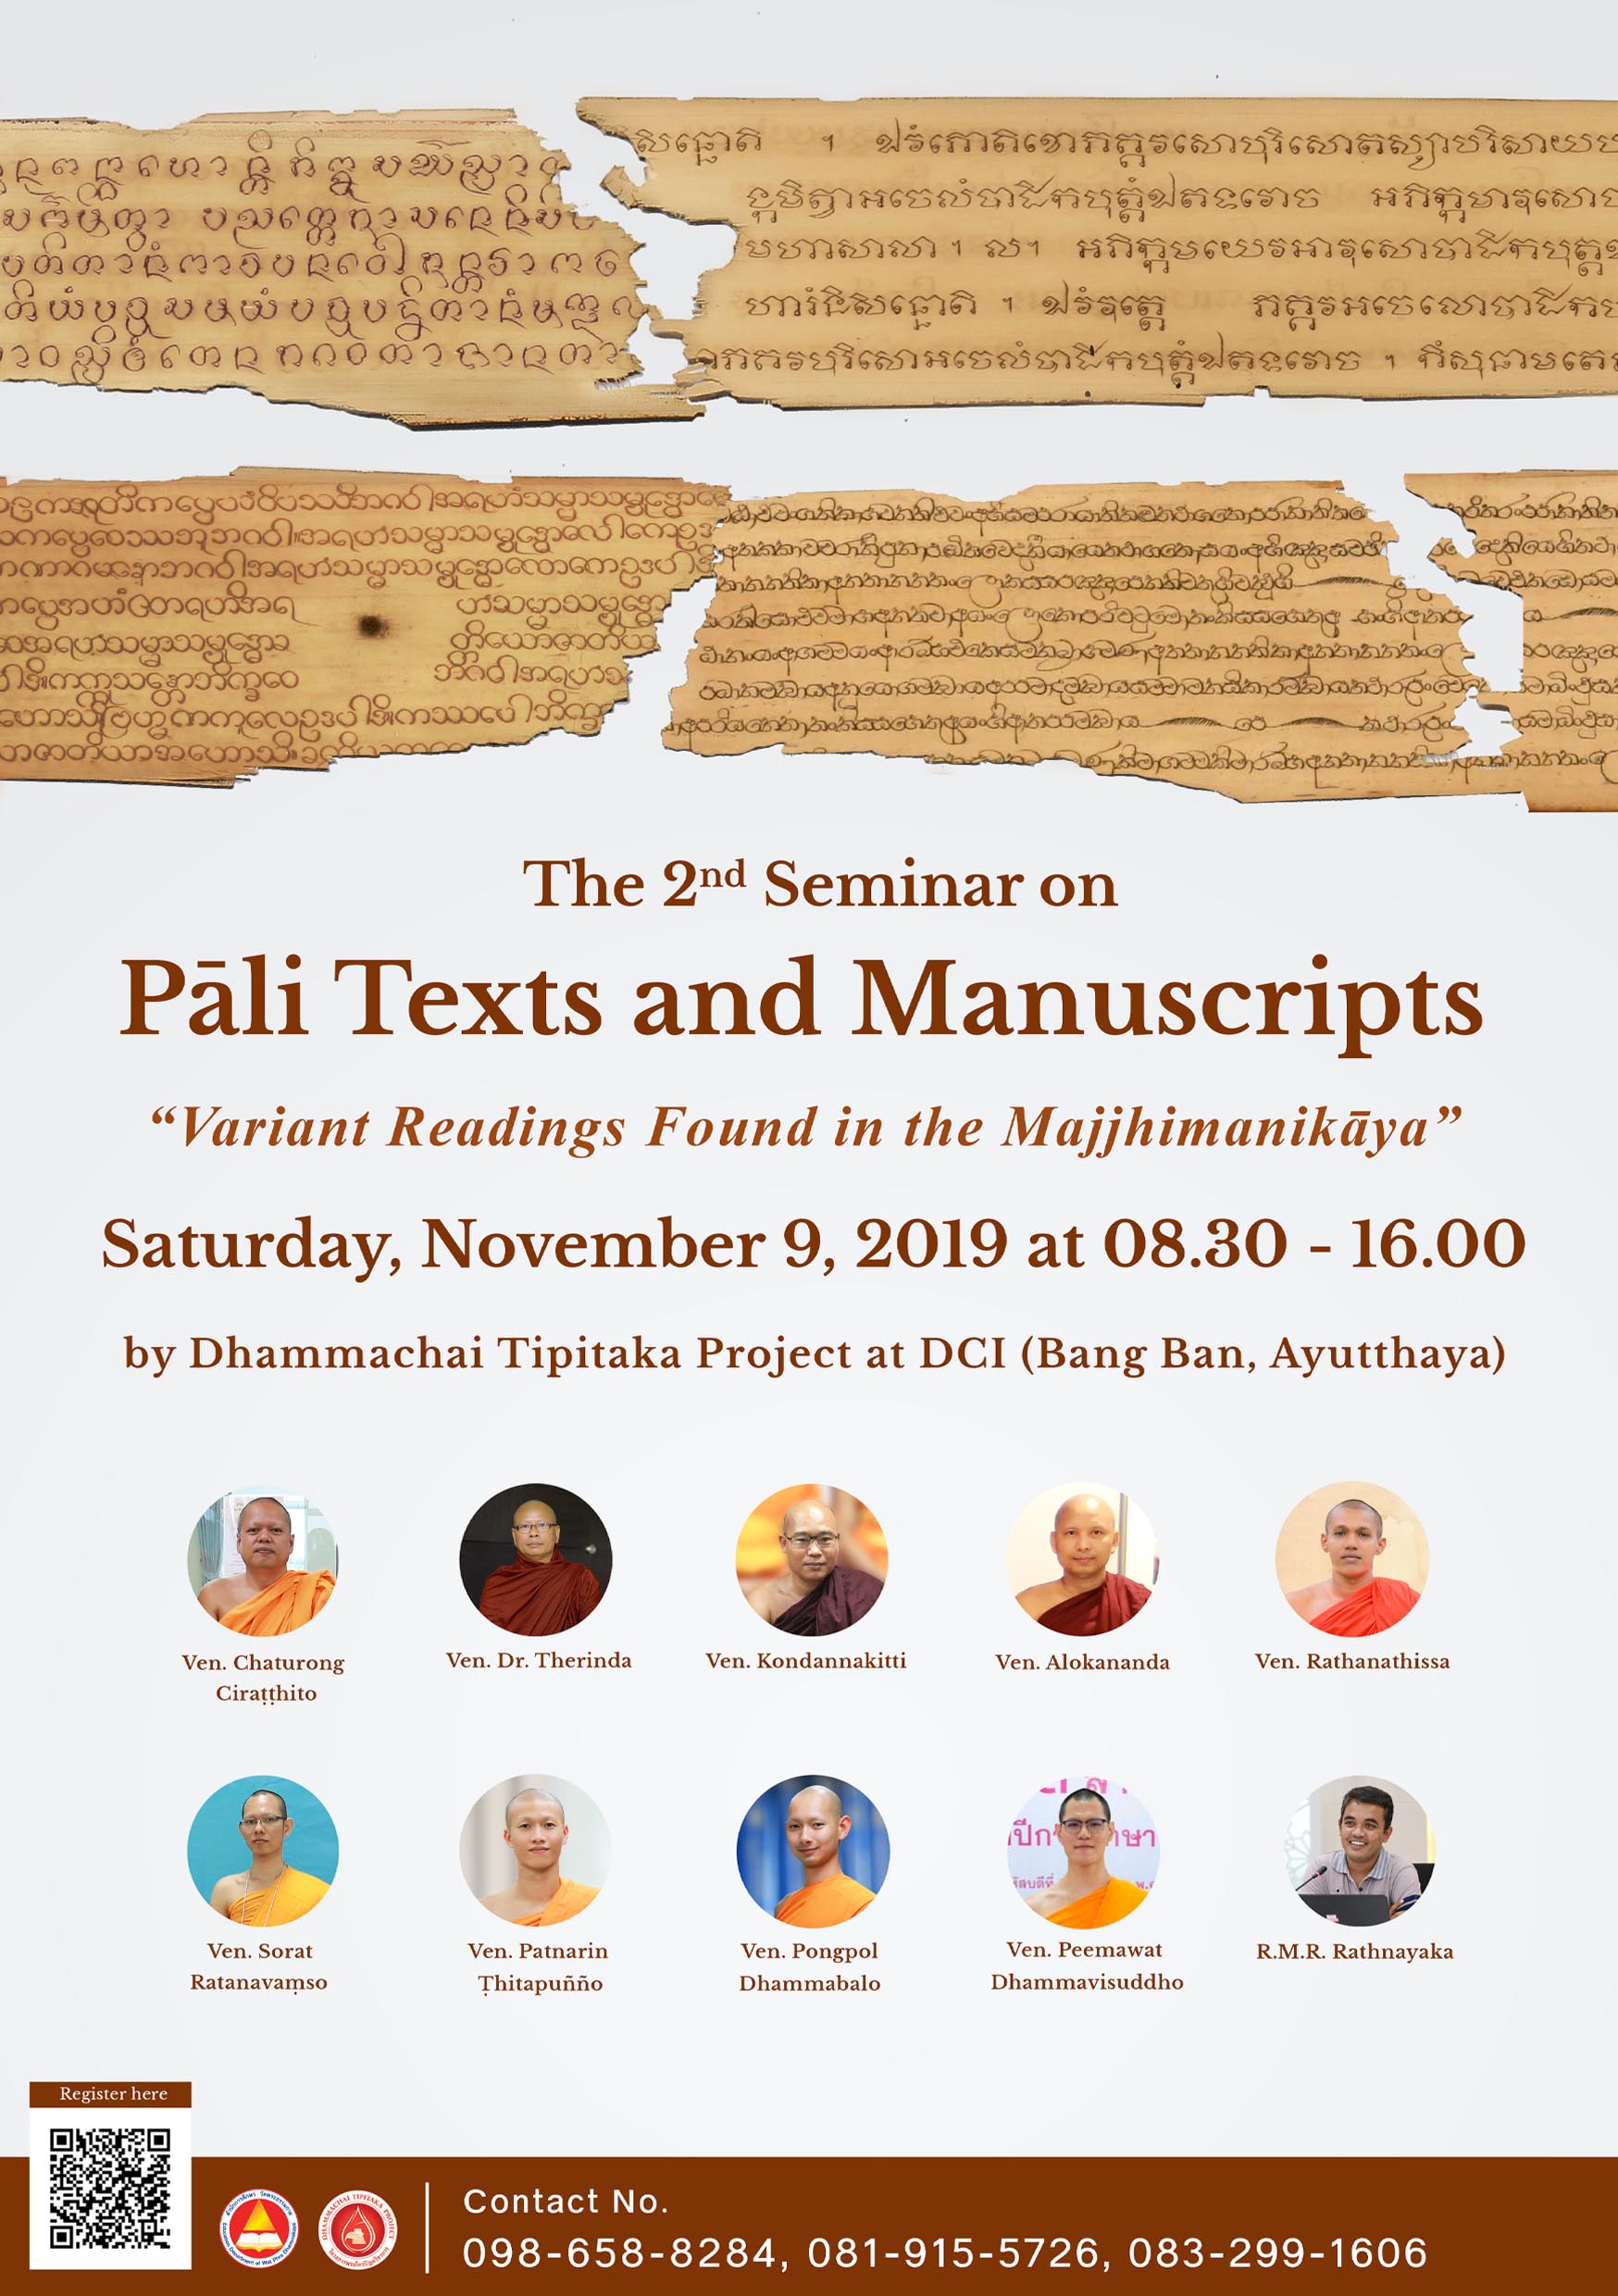 The 2nd Seminar on Pali Texts and Manuscripts: “Variant Readings Found in the Majjhimanikāya”